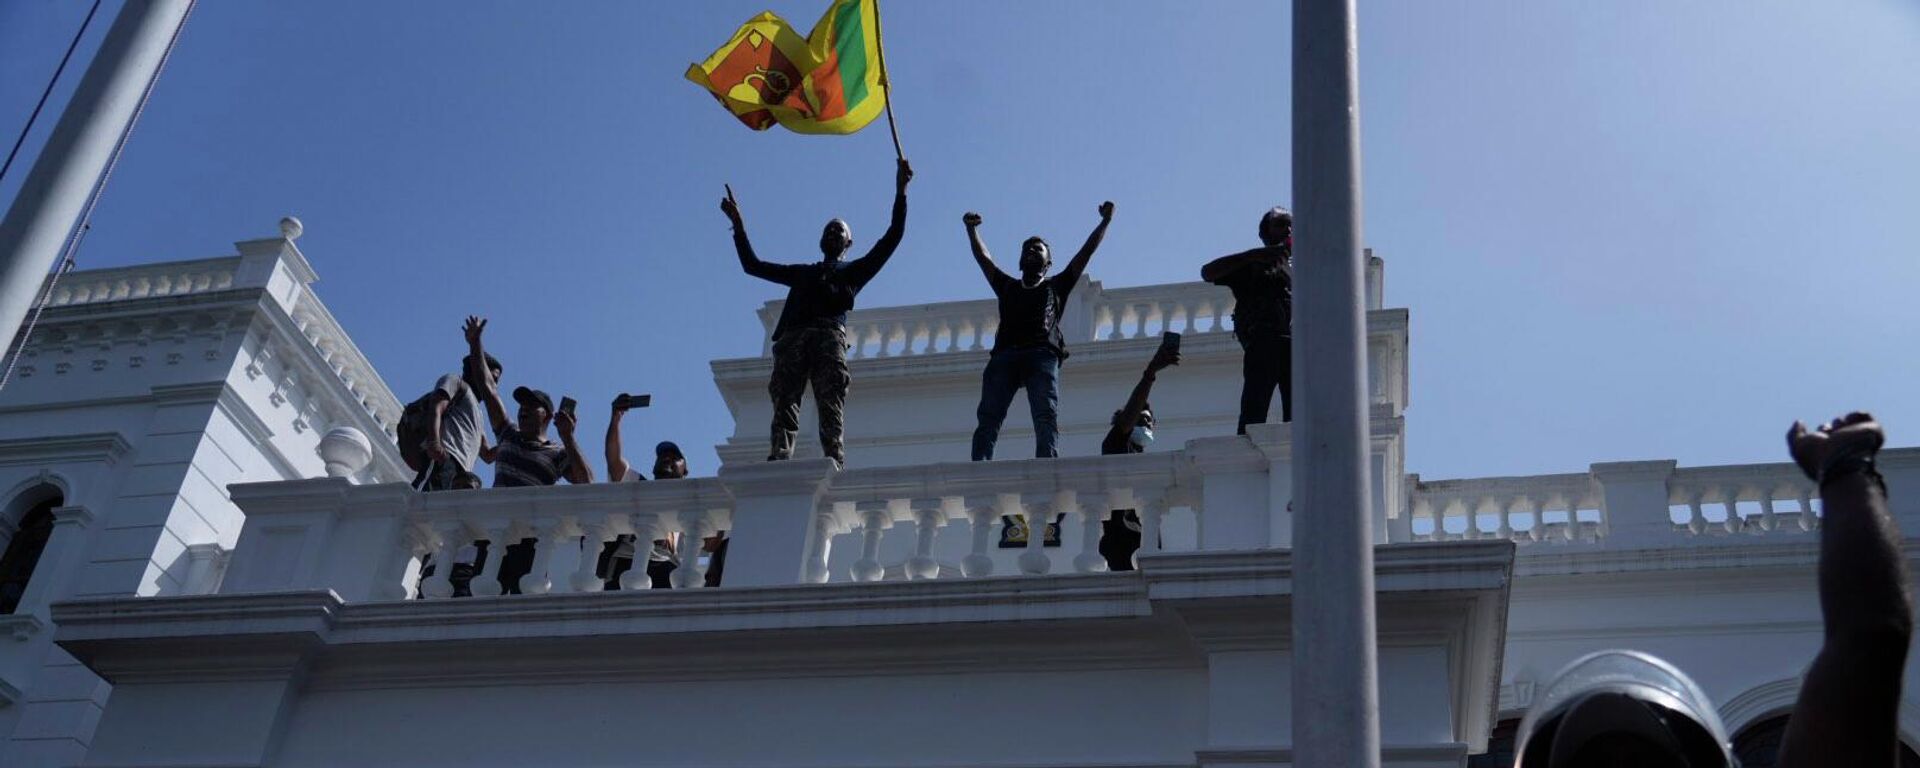 Sri Lankan protesters wave the national flag from the roof of prime minister Ranil Wickremesinghe 's office, demanding he resign after president Gotabaya Rajapaksa fled the country amid economic crisis in Colombo, Sri Lanka, Wednesday, July 13, 2022 - Sputnik International, 1920, 27.07.2022